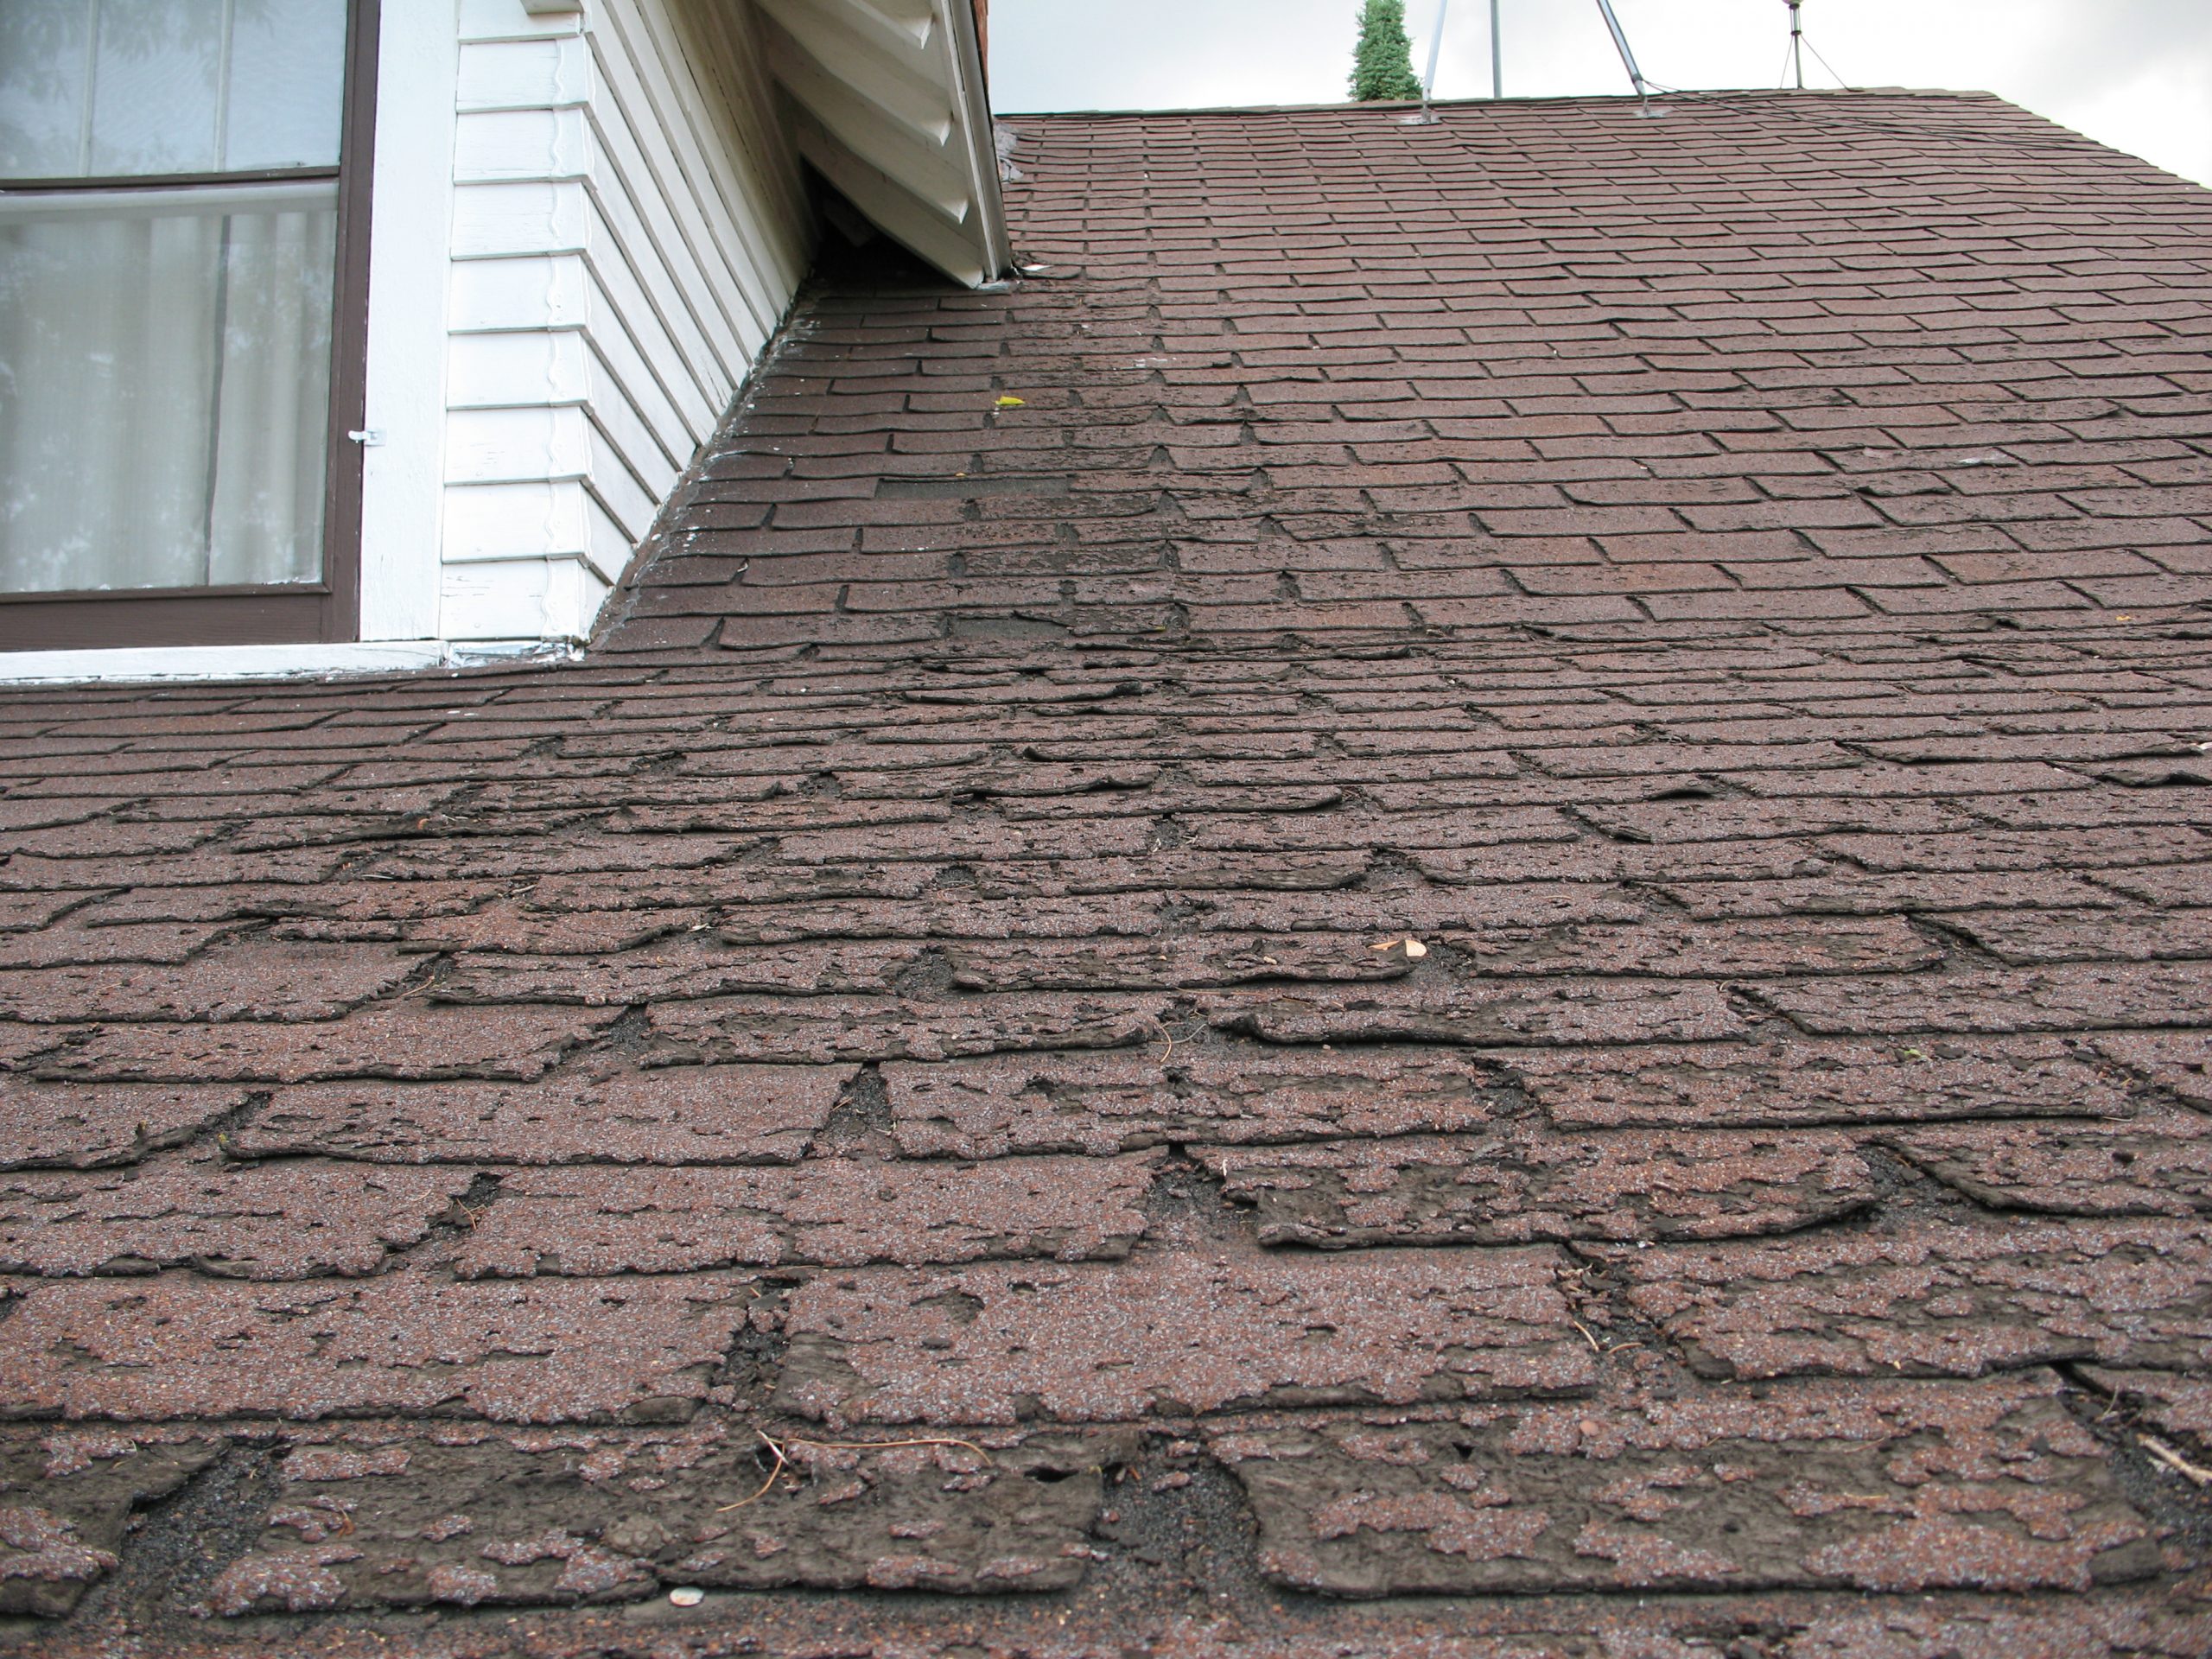 discolored and worn roof shingles